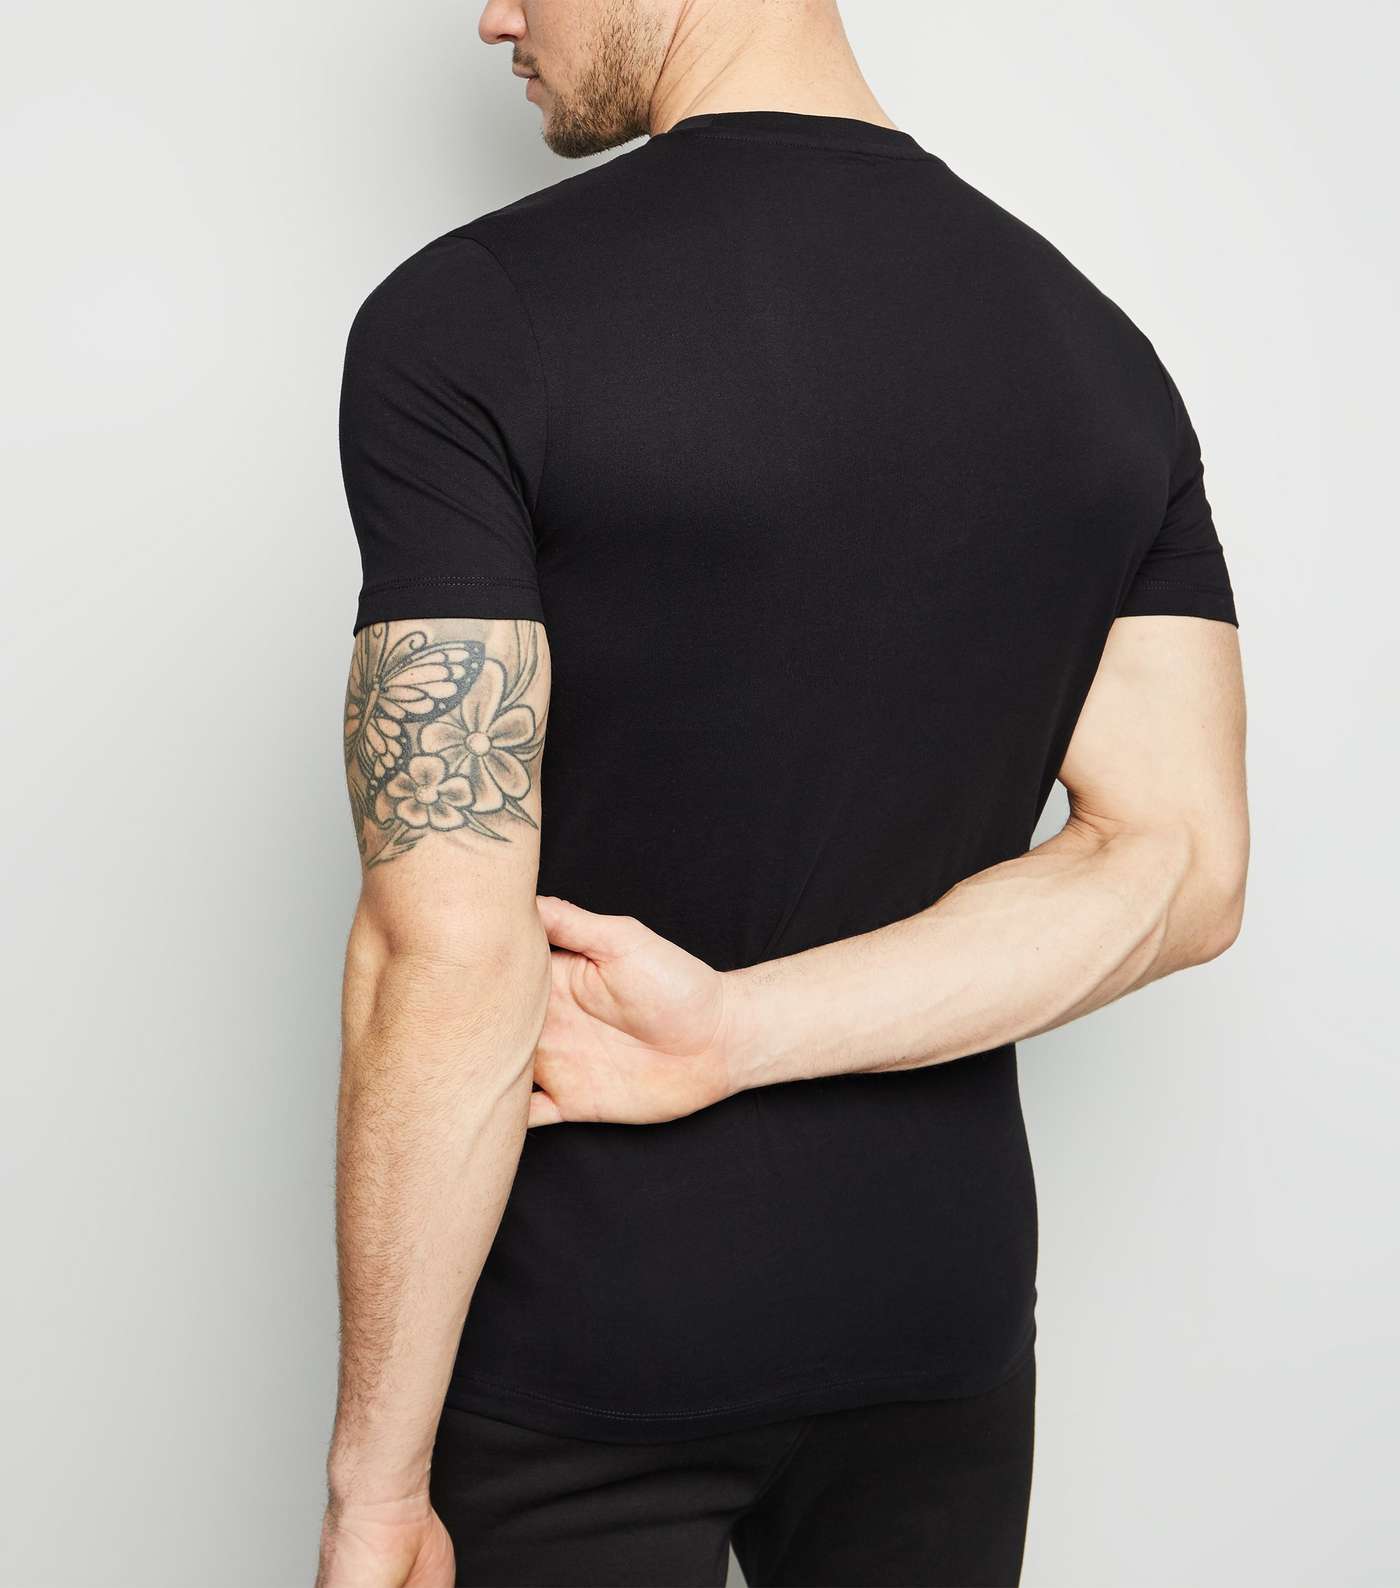 Black TW9 Embroidered Muscle Fit T-Shirt Image 3